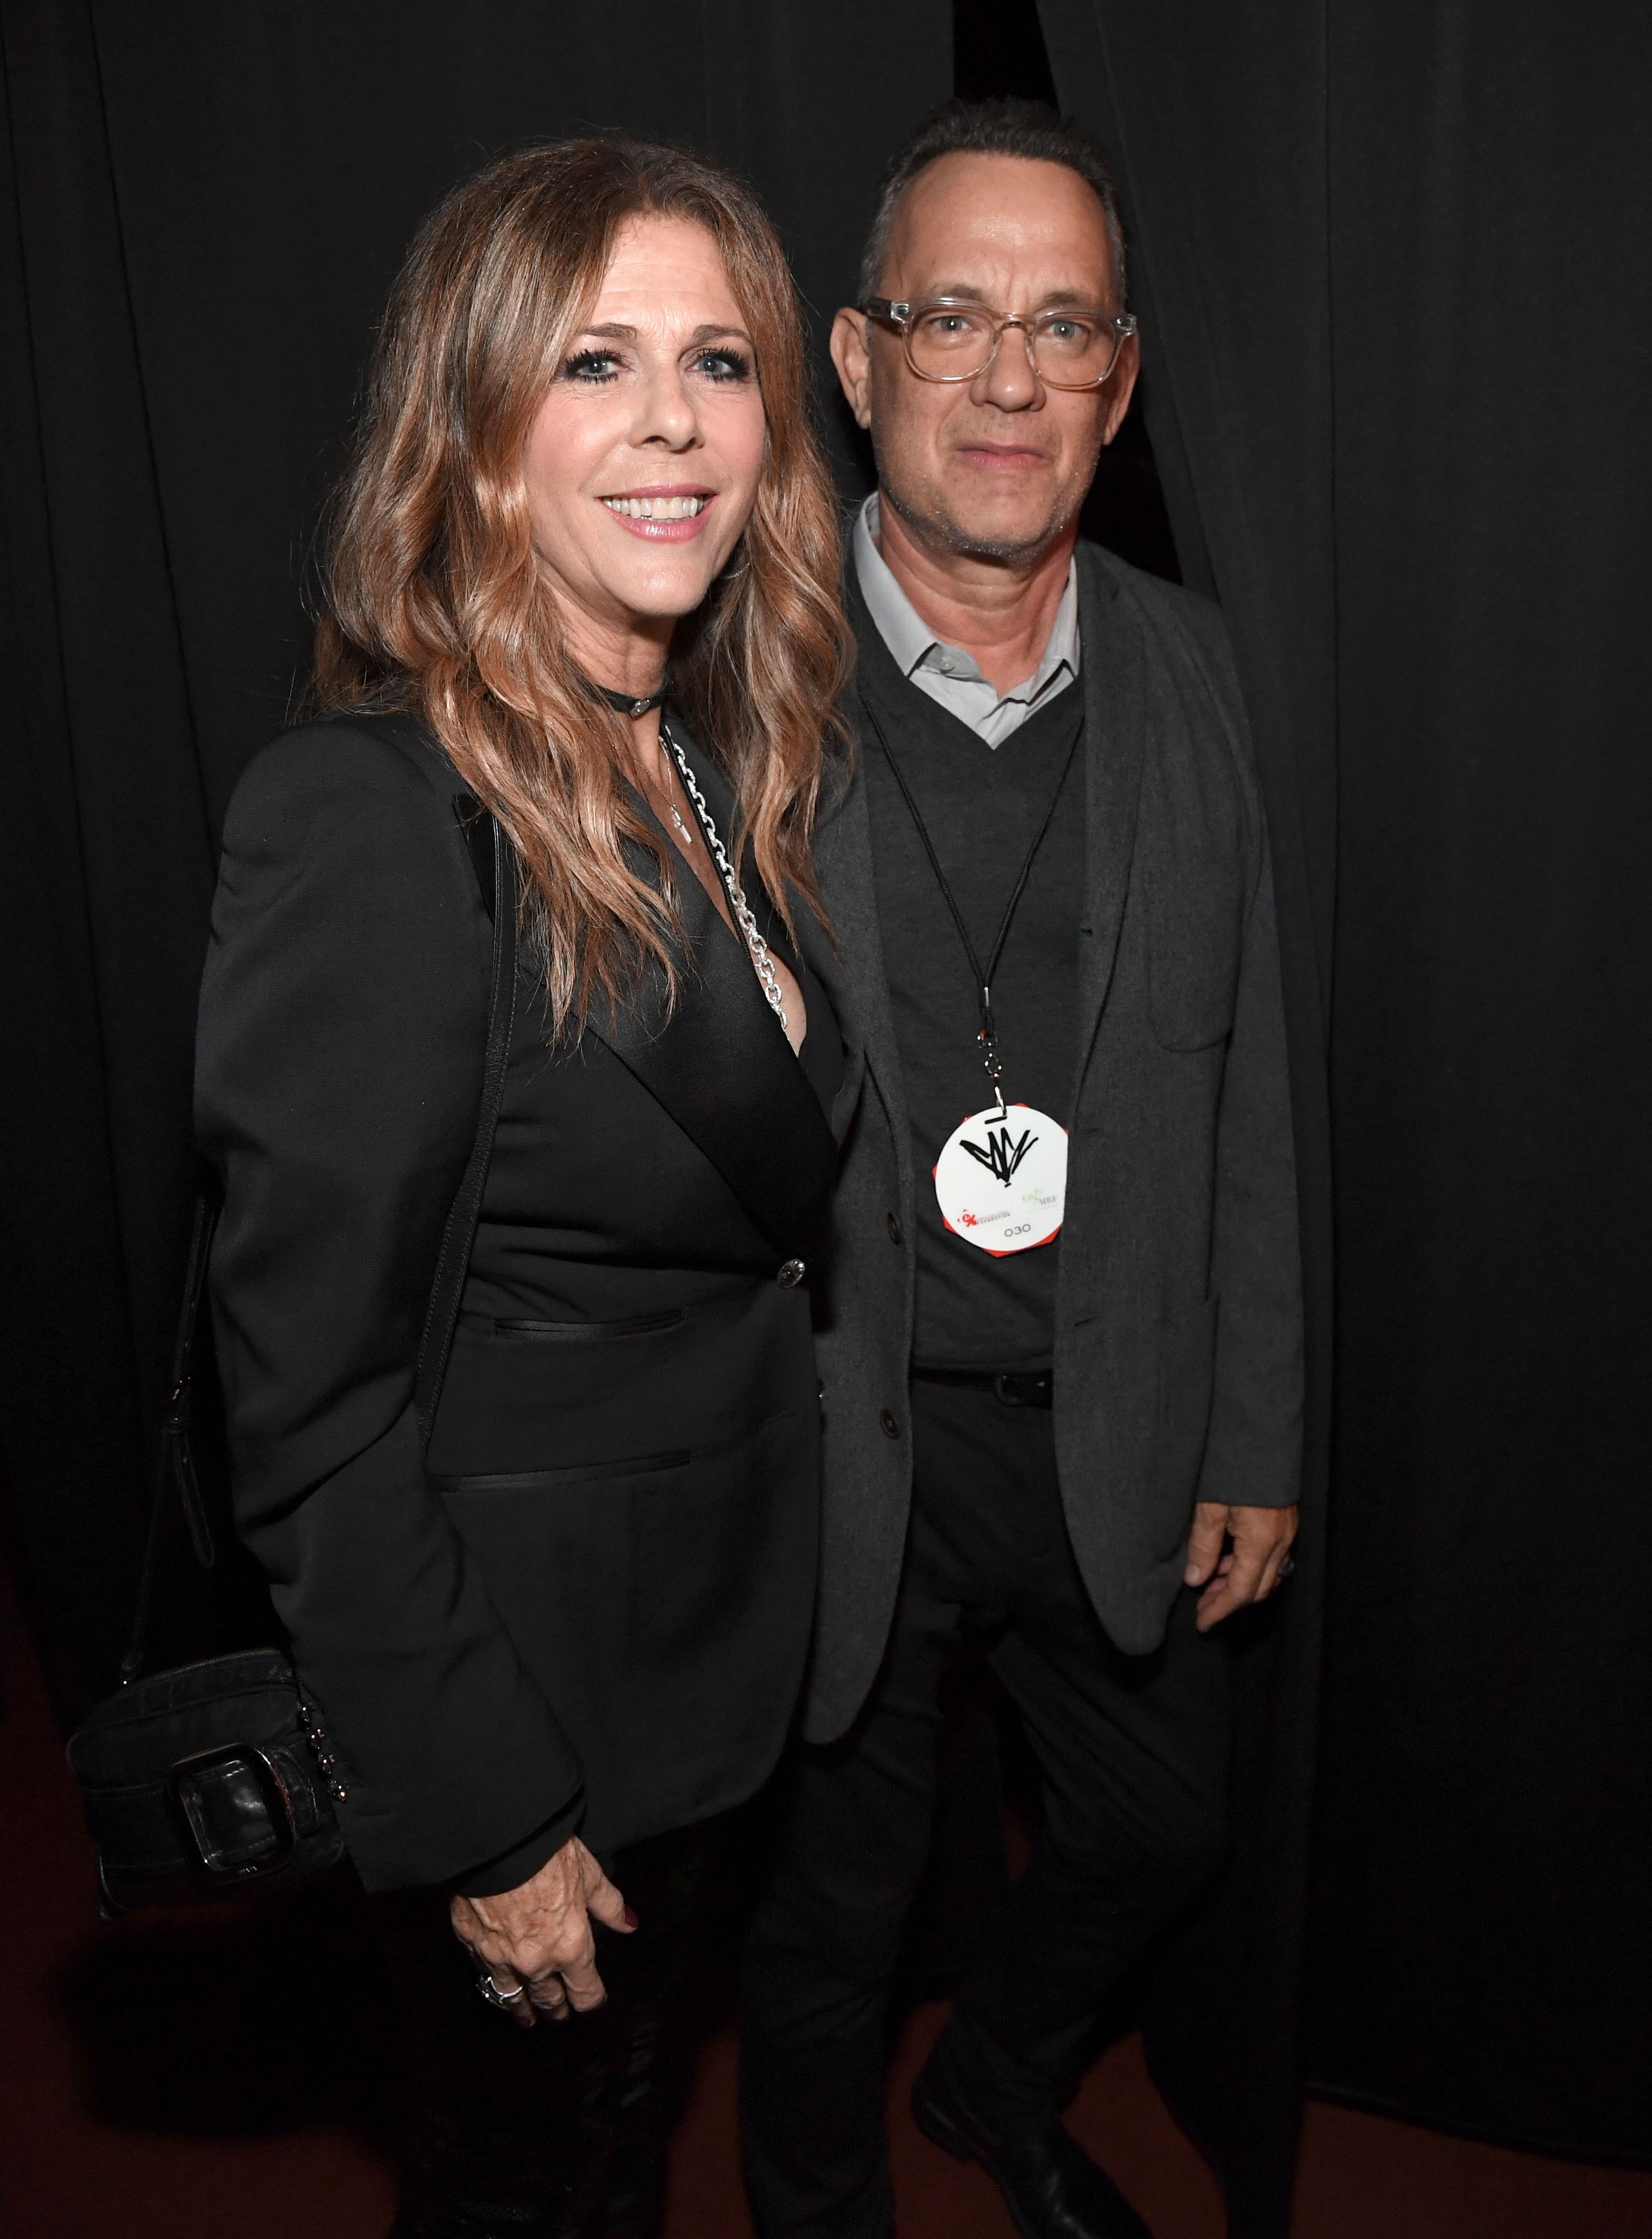 Rita Wilson and Tom Hanks at The Forum on January 16, 2019, in Inglewood, California | Photo: Kevin Mazur/Getty Images